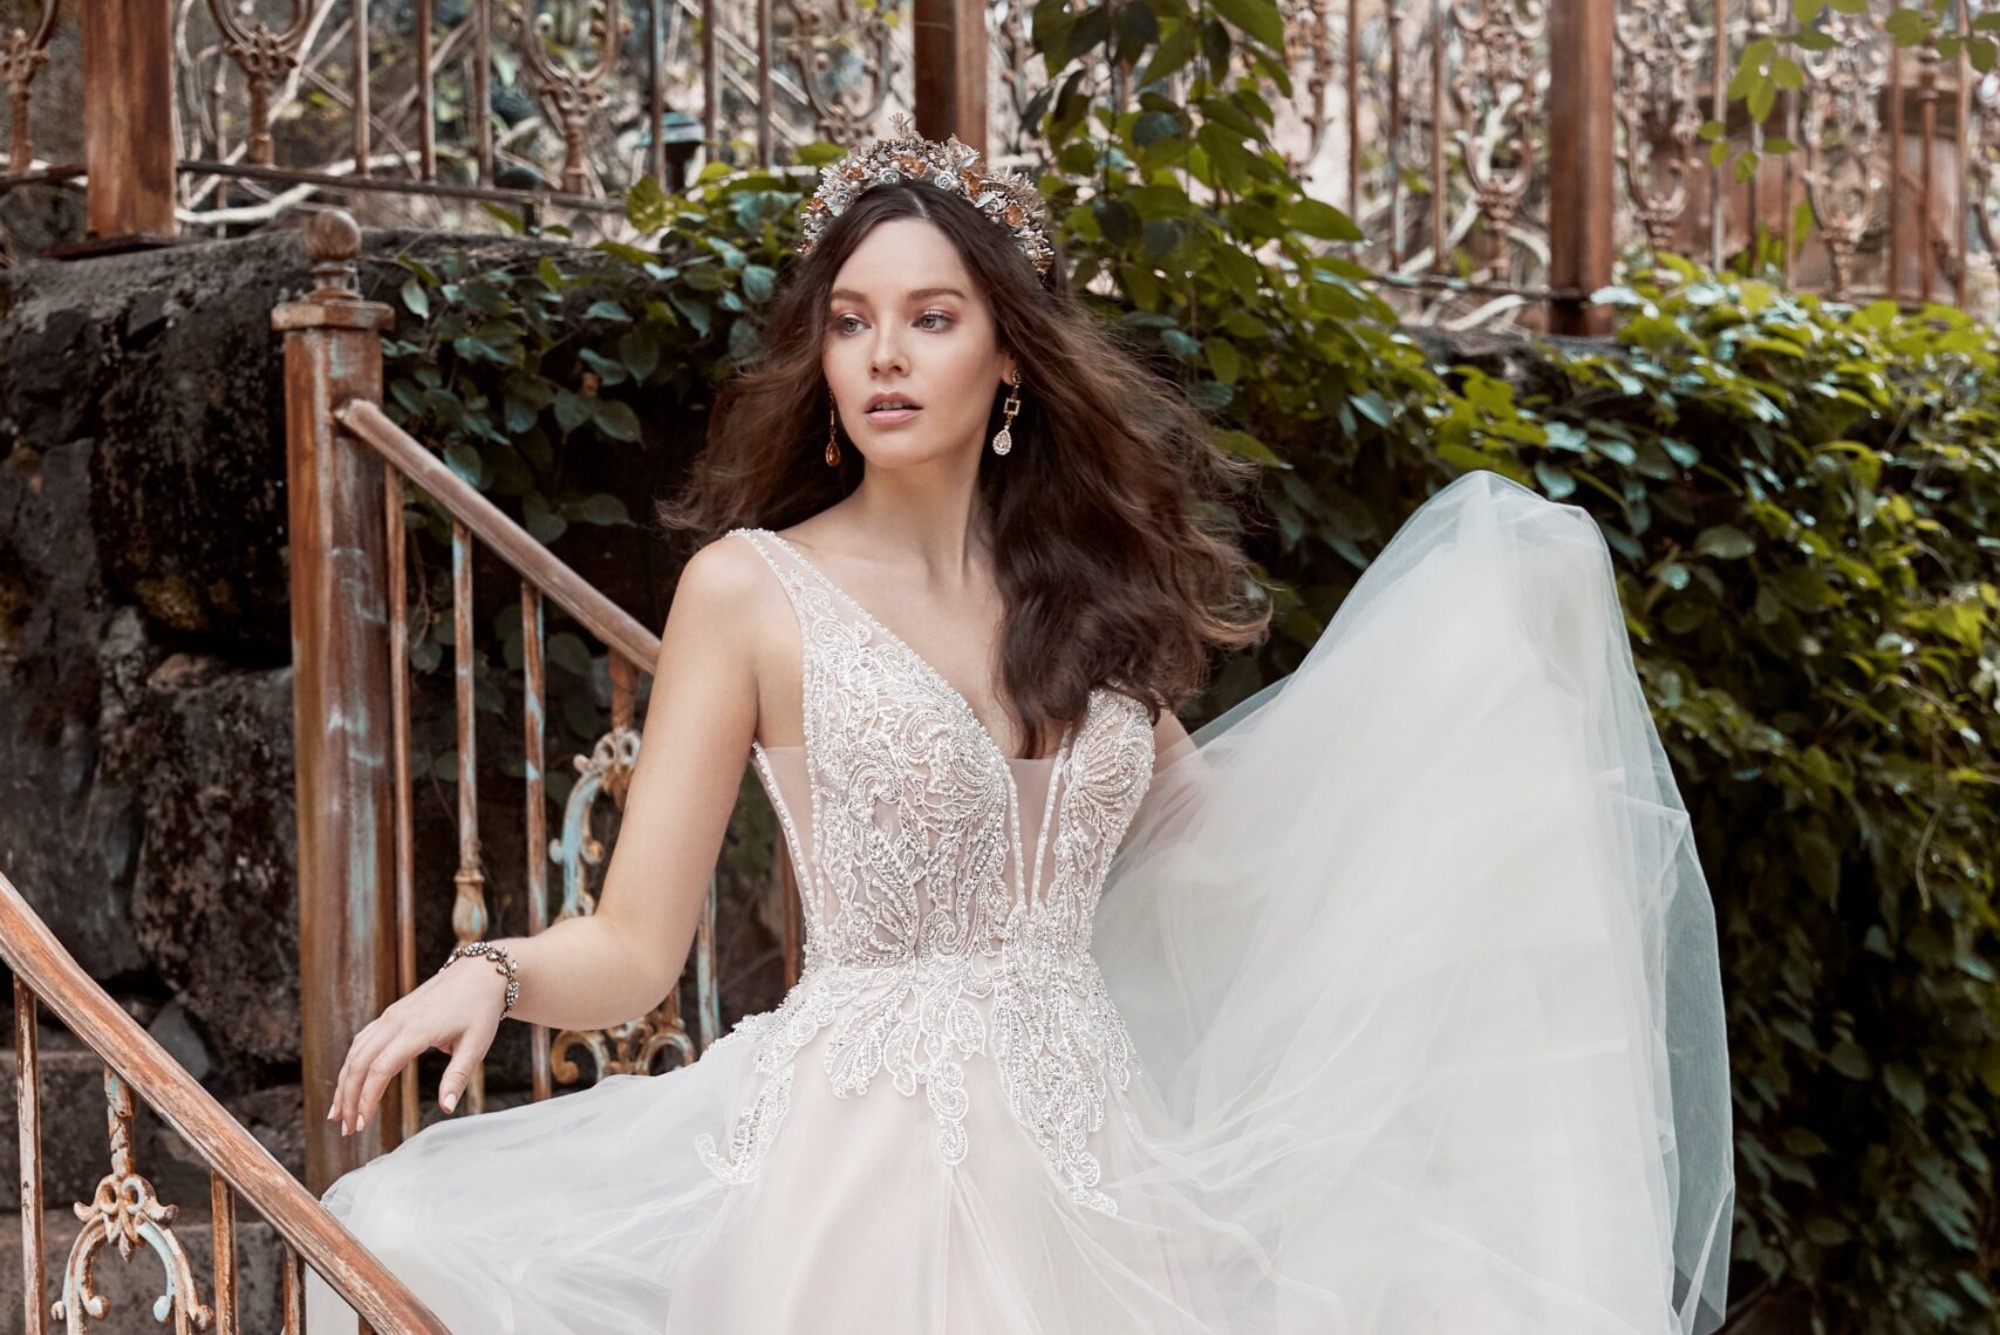 Where to Buy Maggie Sottero Wedding Dresses